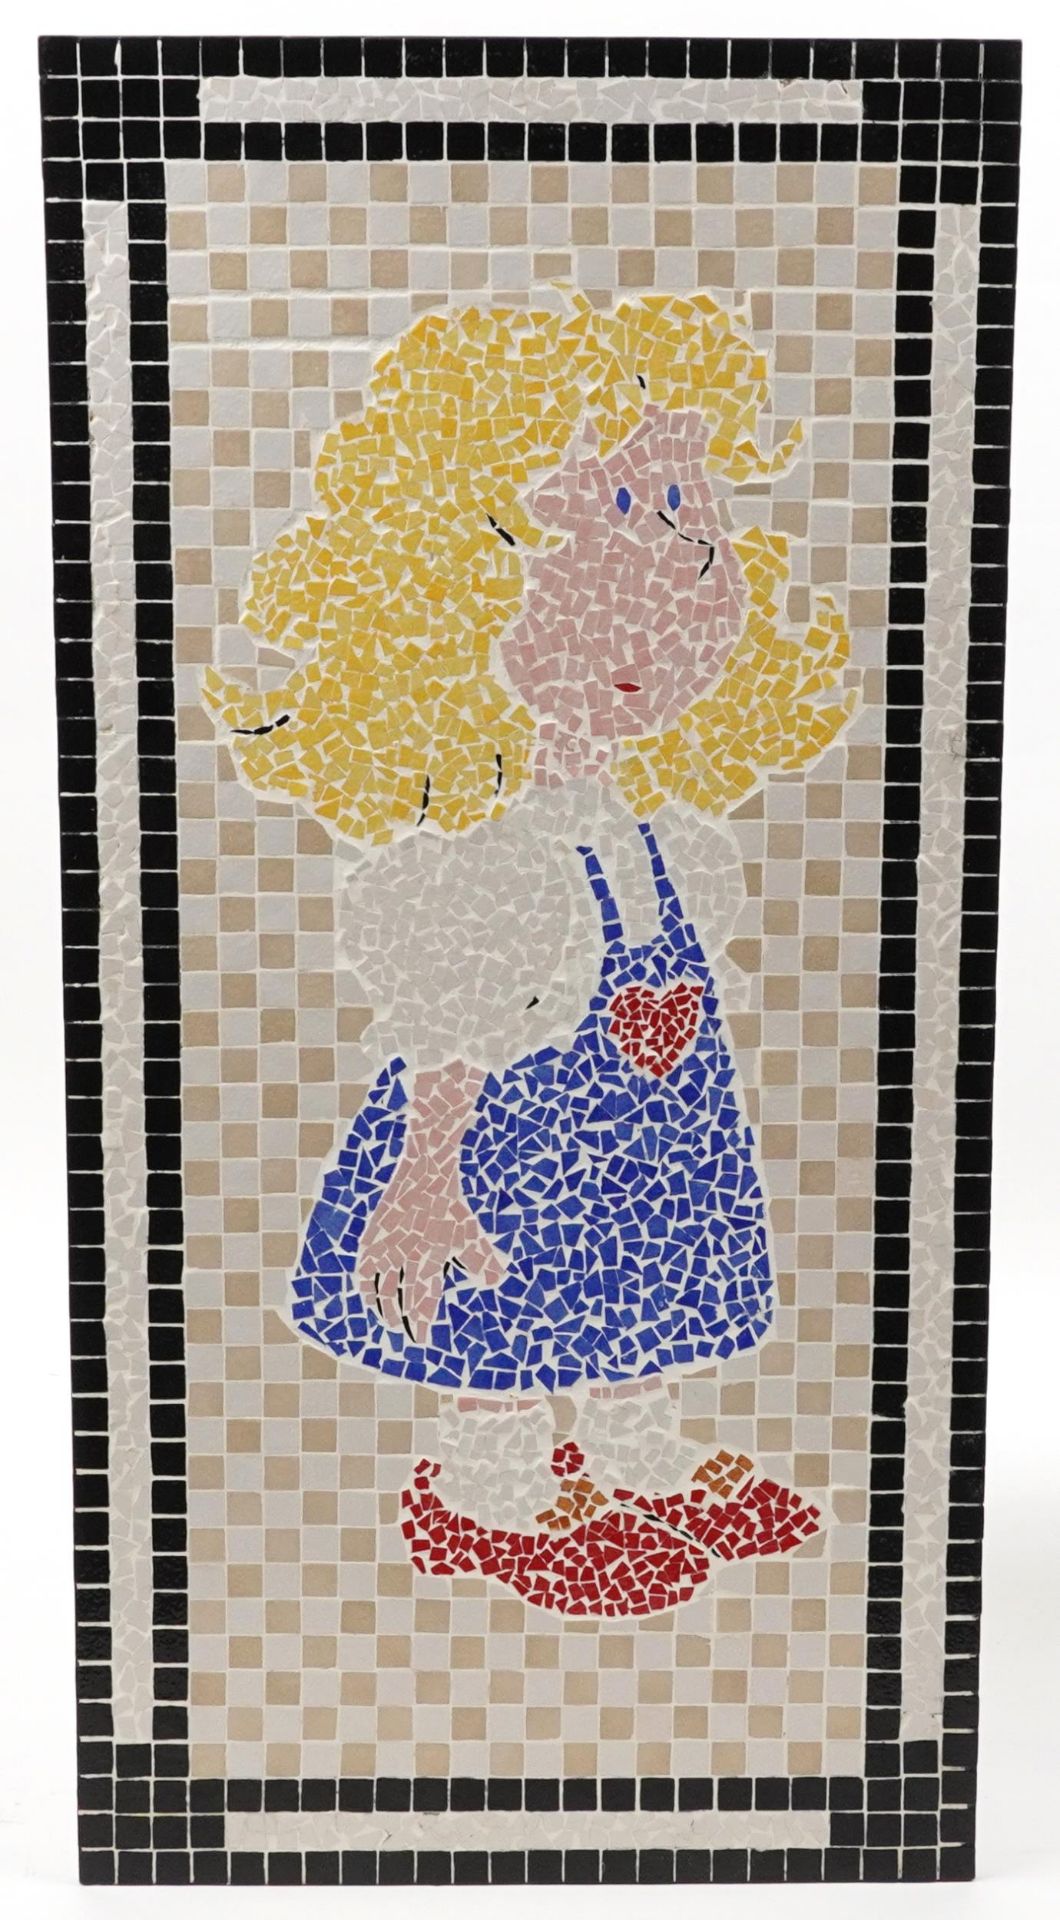 Rectangular contemporary mosaic ceramic picture of a young girl wearing a blue dress created by